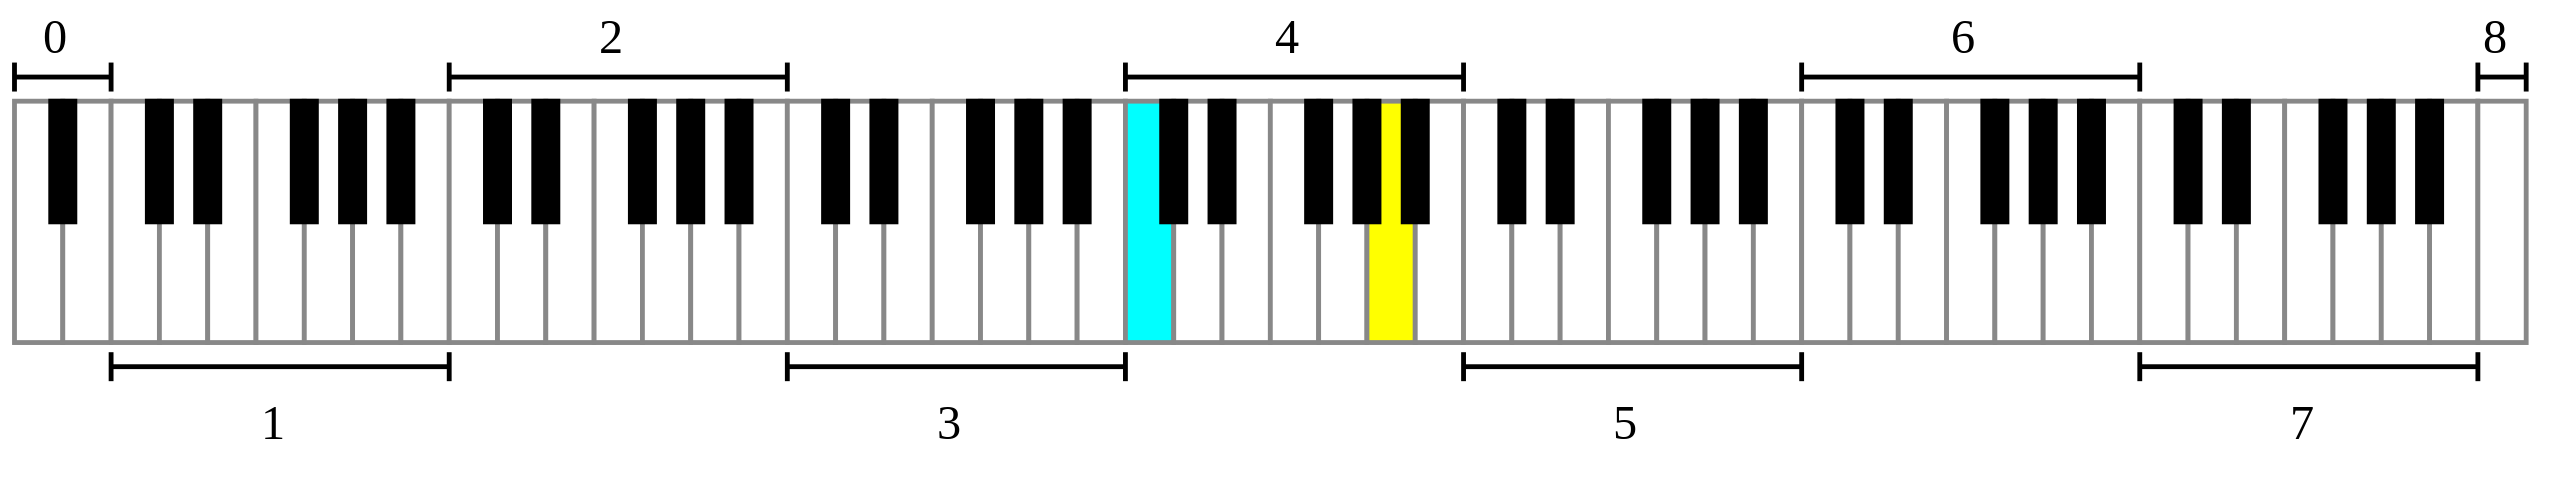 scientific pitch notation on piano keyboard